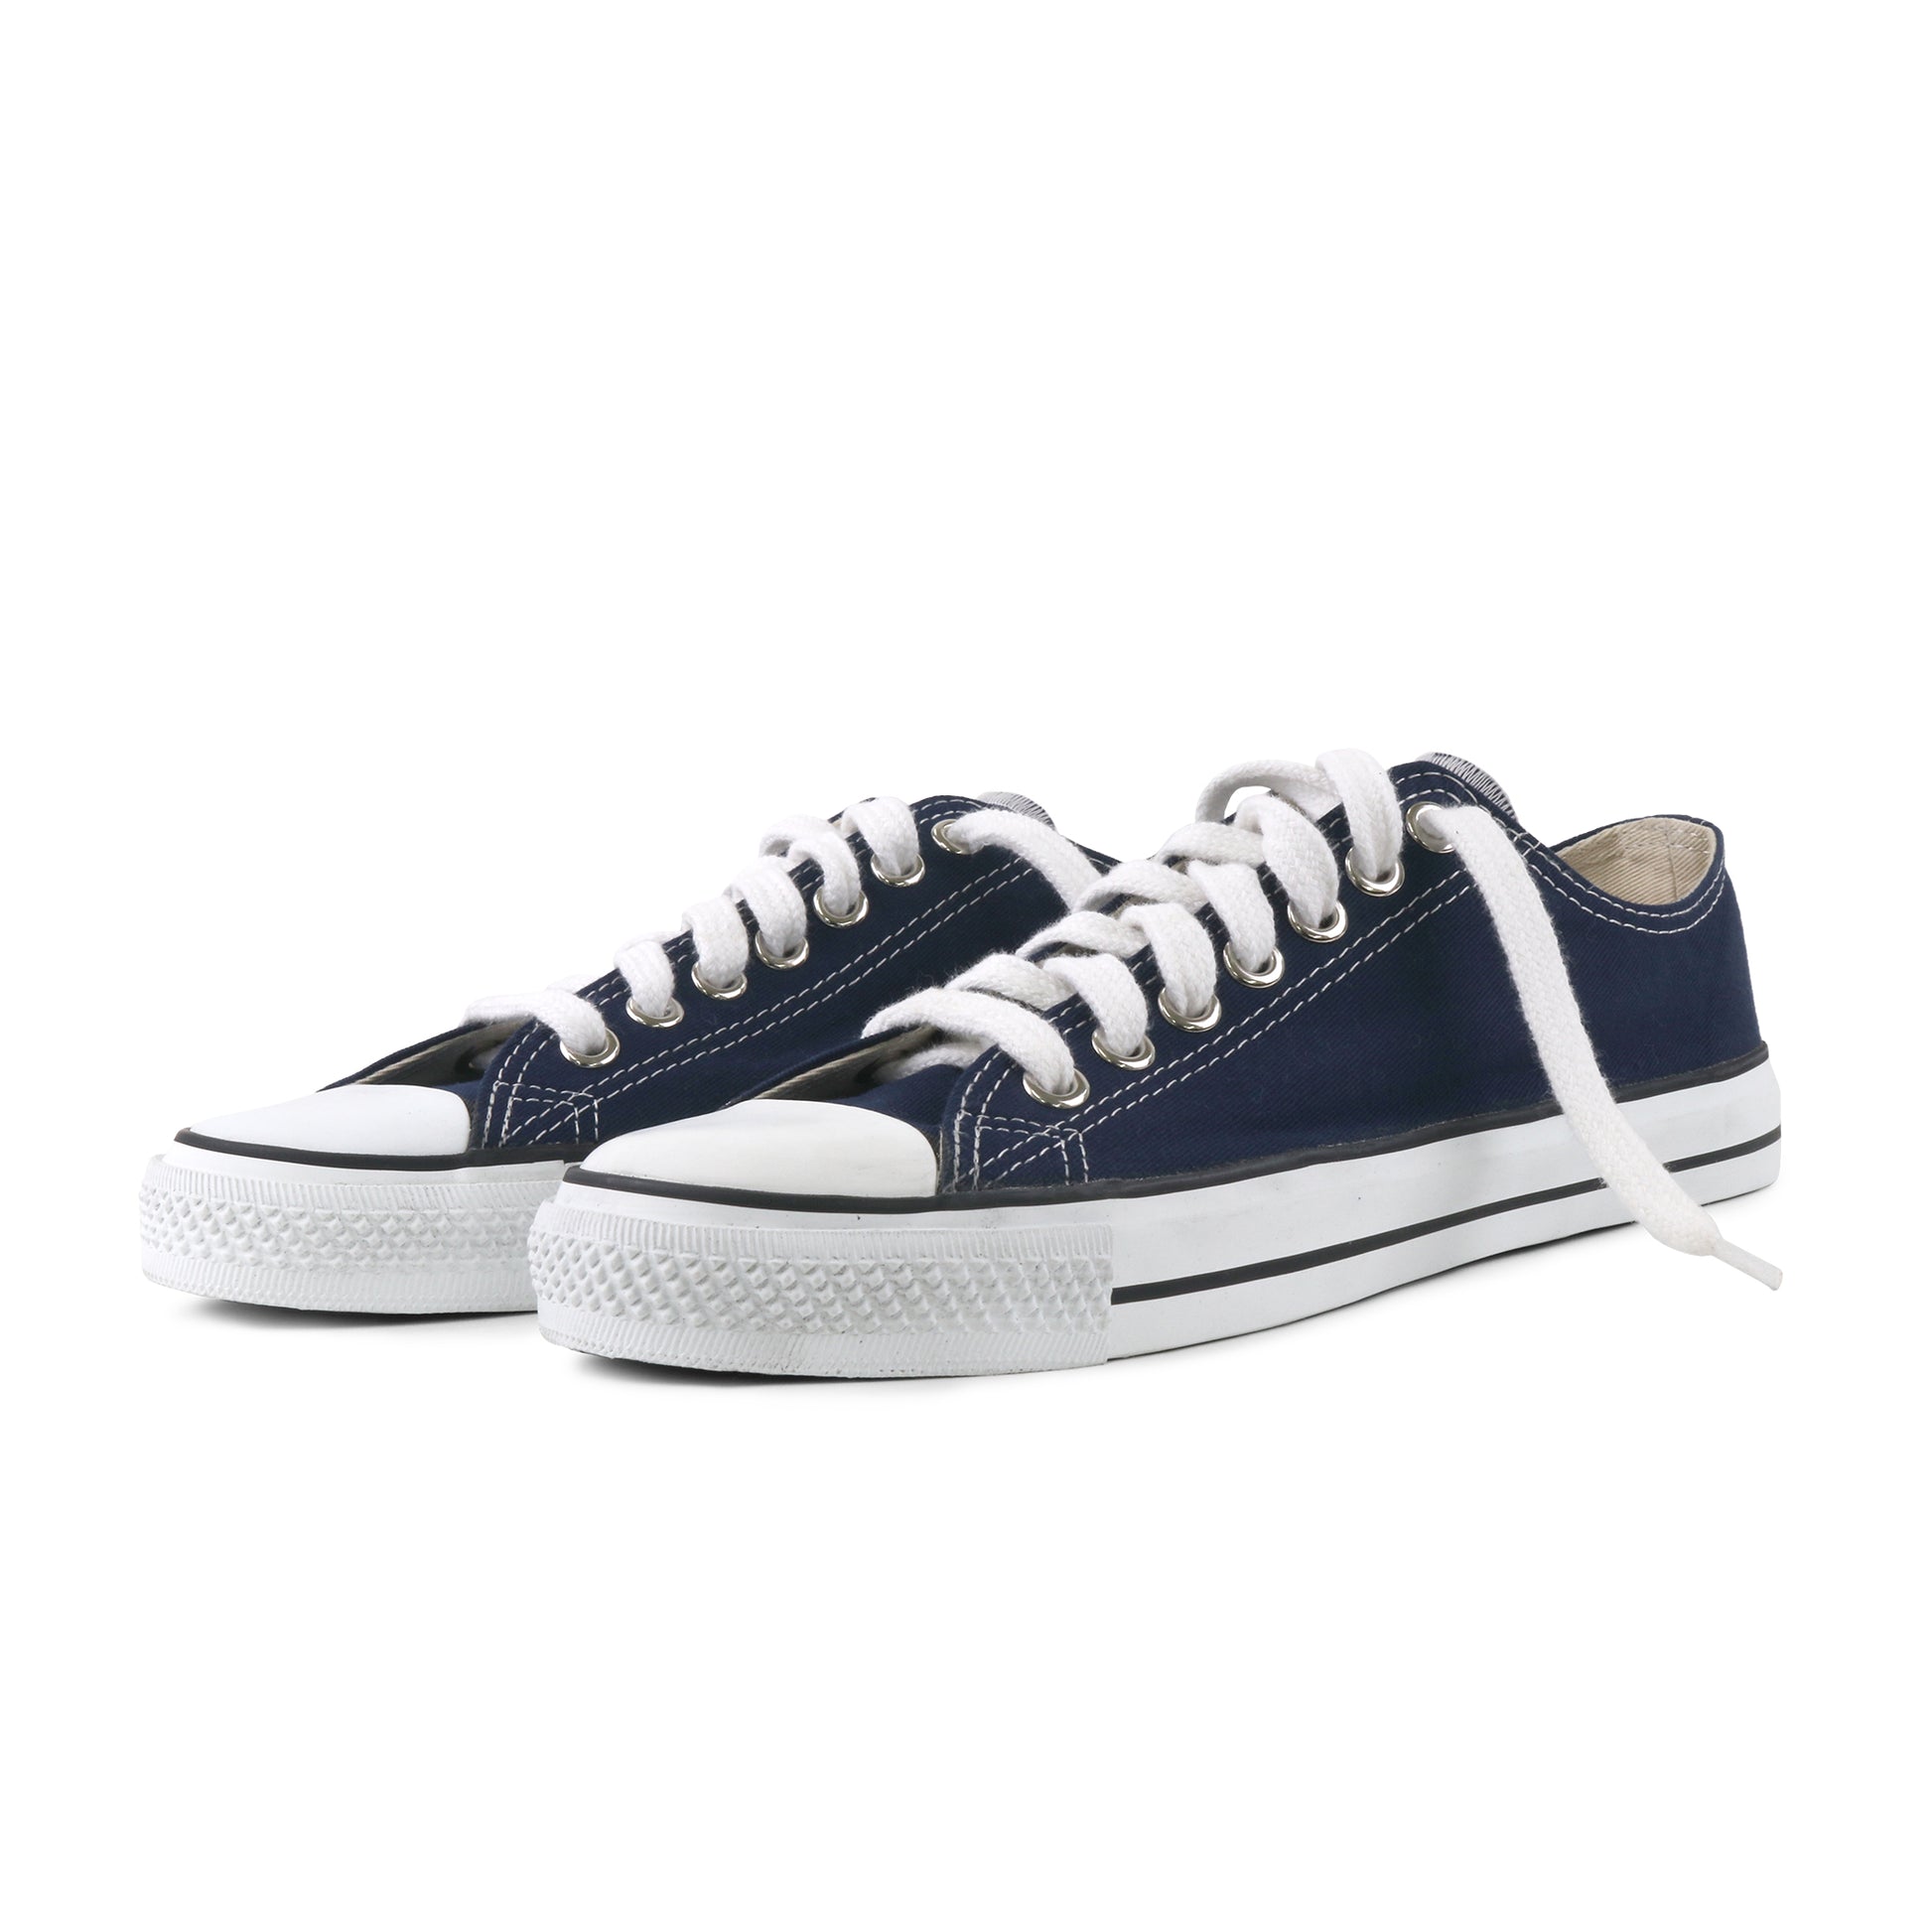 Etiko Vegan Low Cut Blue and White Sneakers Organic and Fairtrade Certified Ethical Sneakers